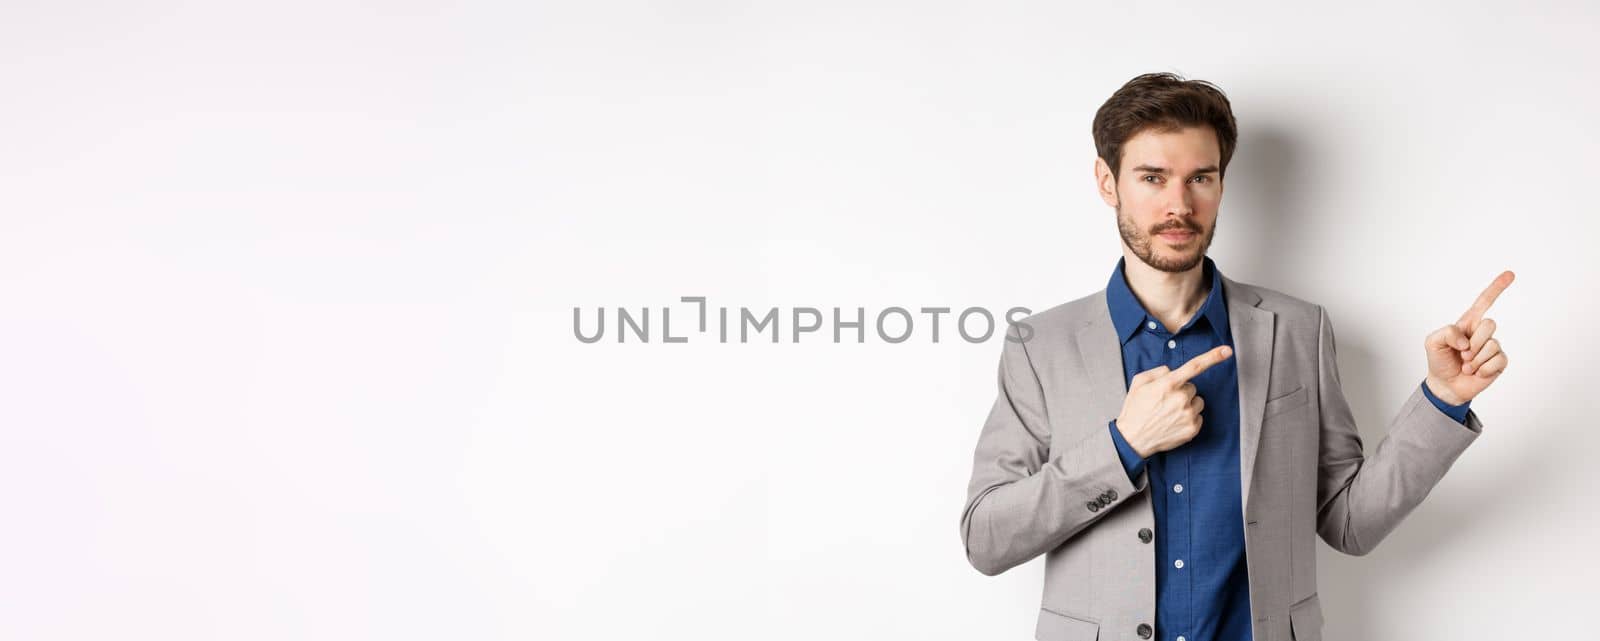 Confident handsome man in business suit pointing at upper right corner logo, showing company banner and smiling assertive, standing on white background.